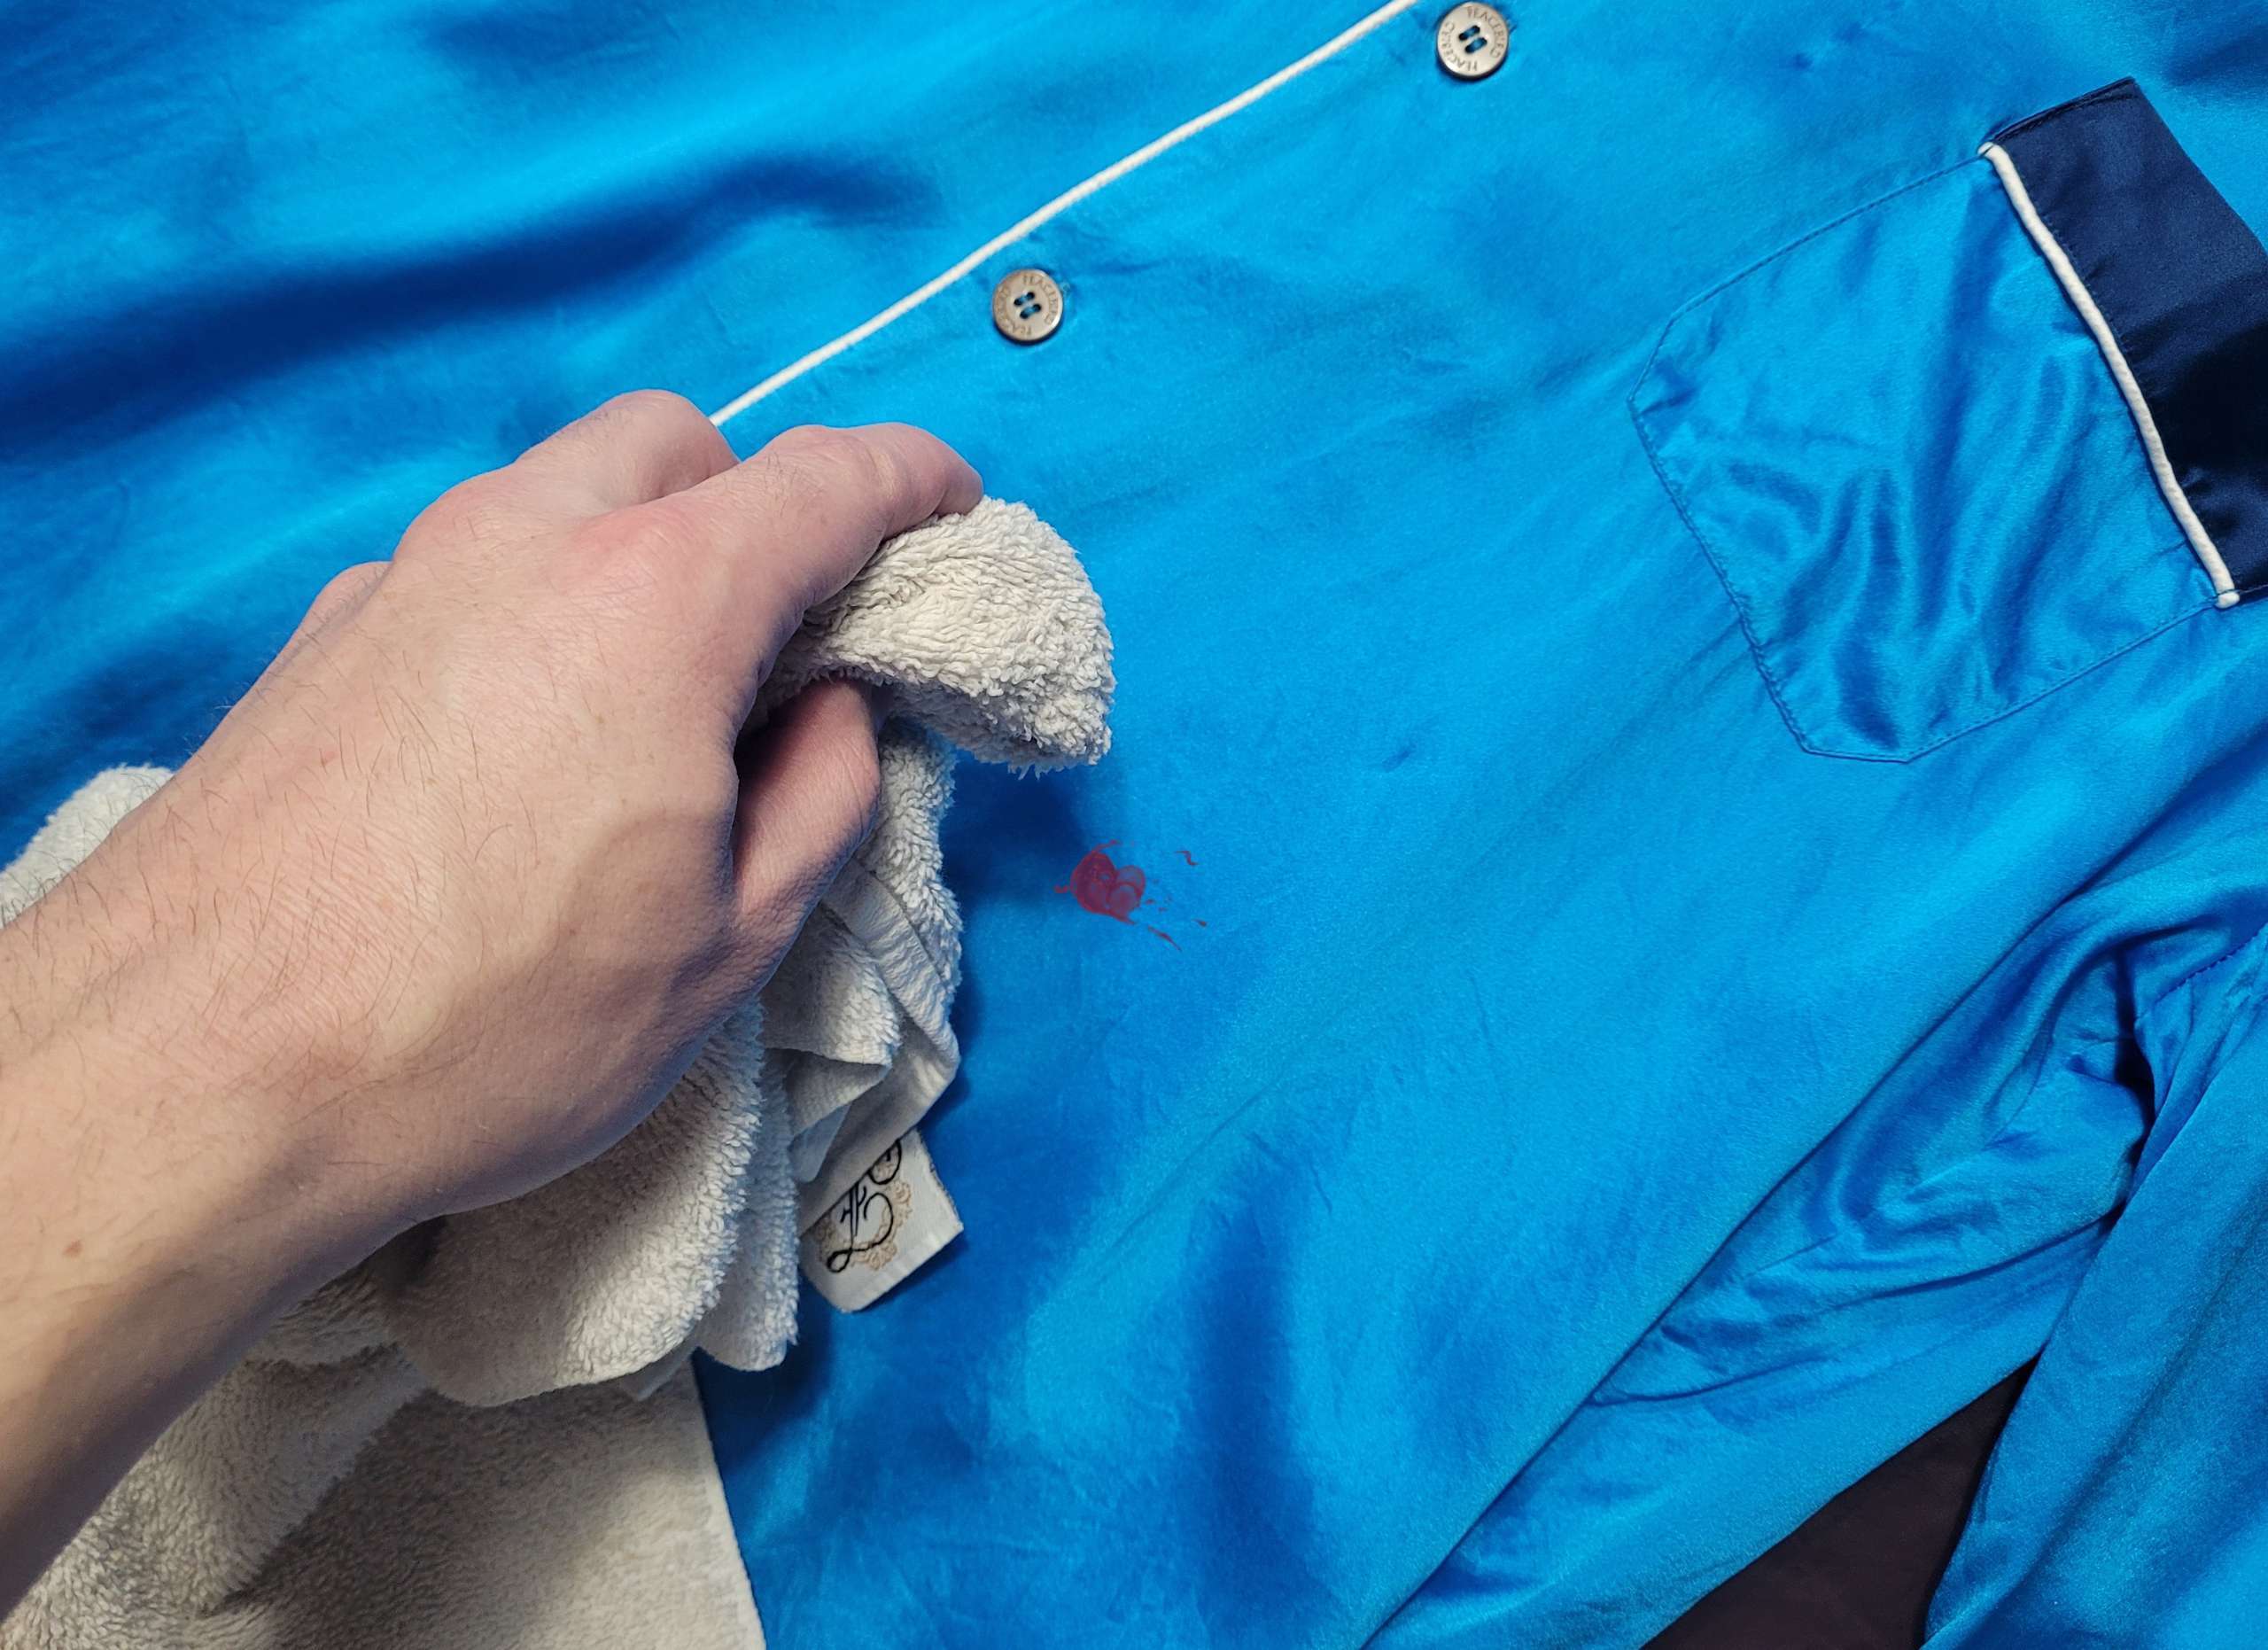 photo of a person using a cloth to dab a stain out of a satin garment